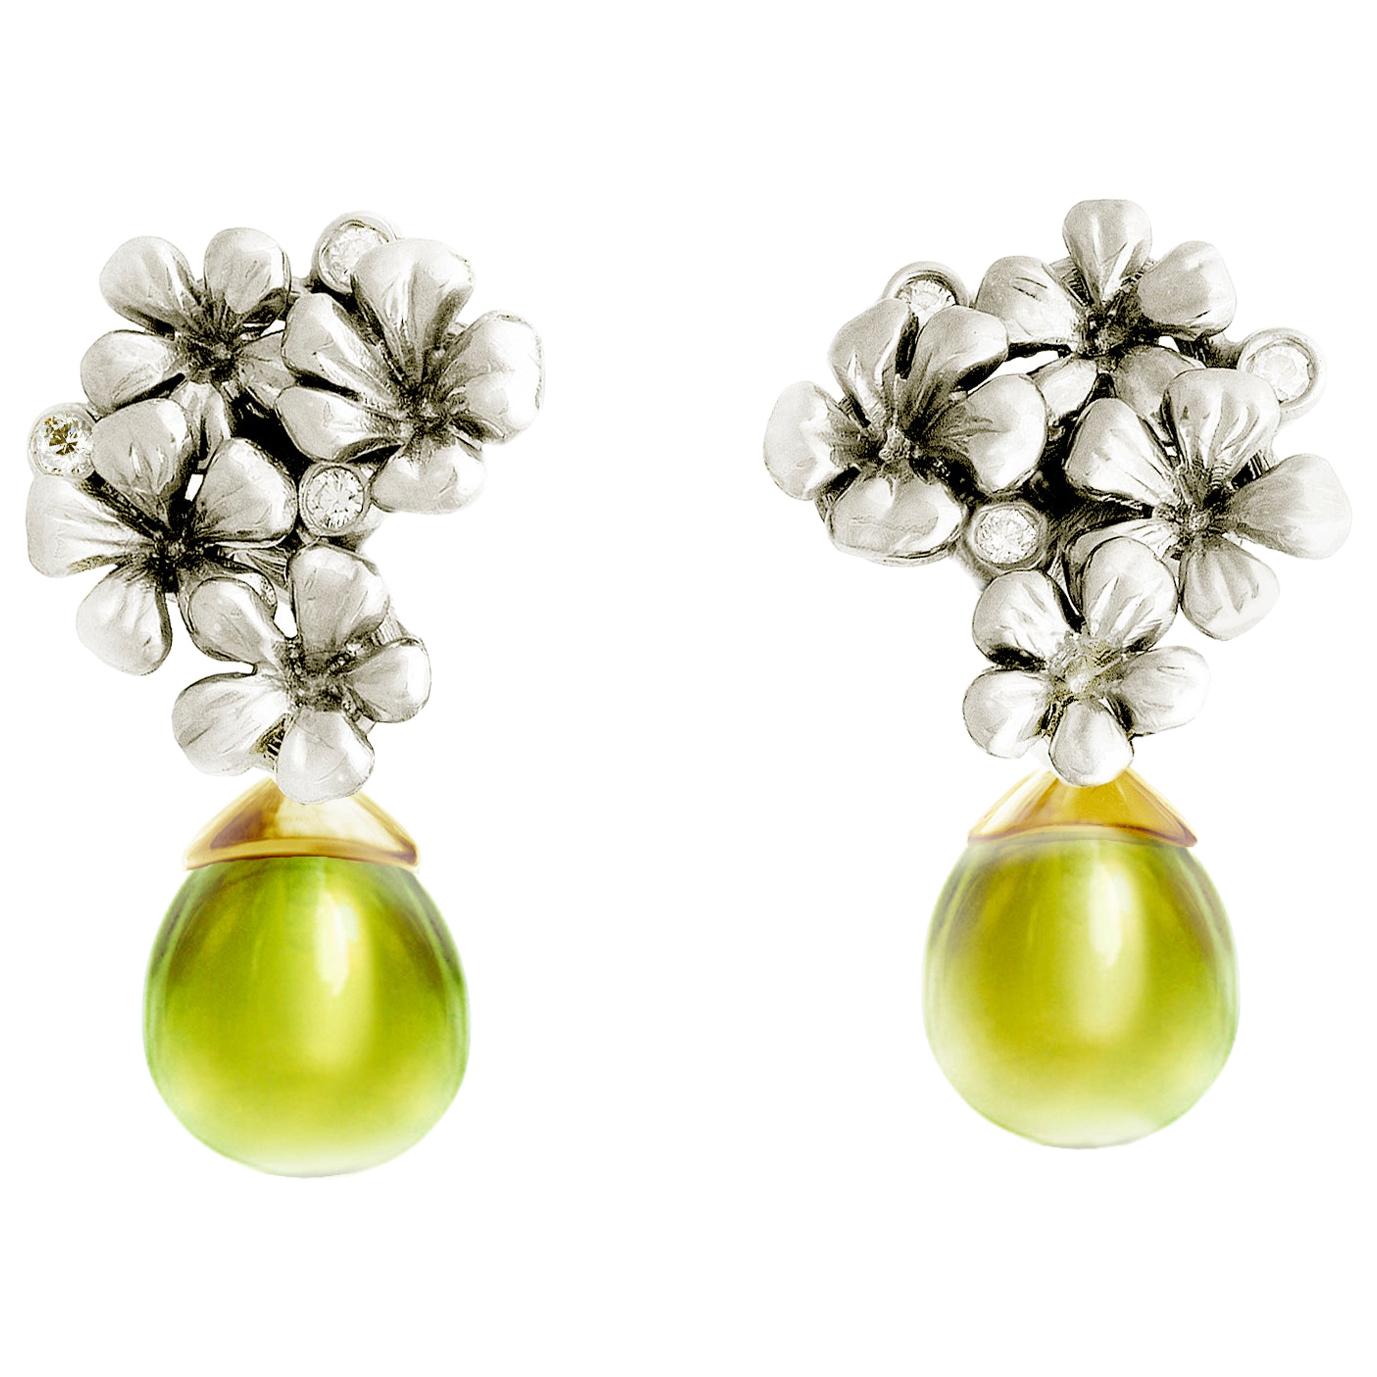 Two-tone Gold Plum Flowers Drop Earrings with Diamonds in White and Yellow Gold